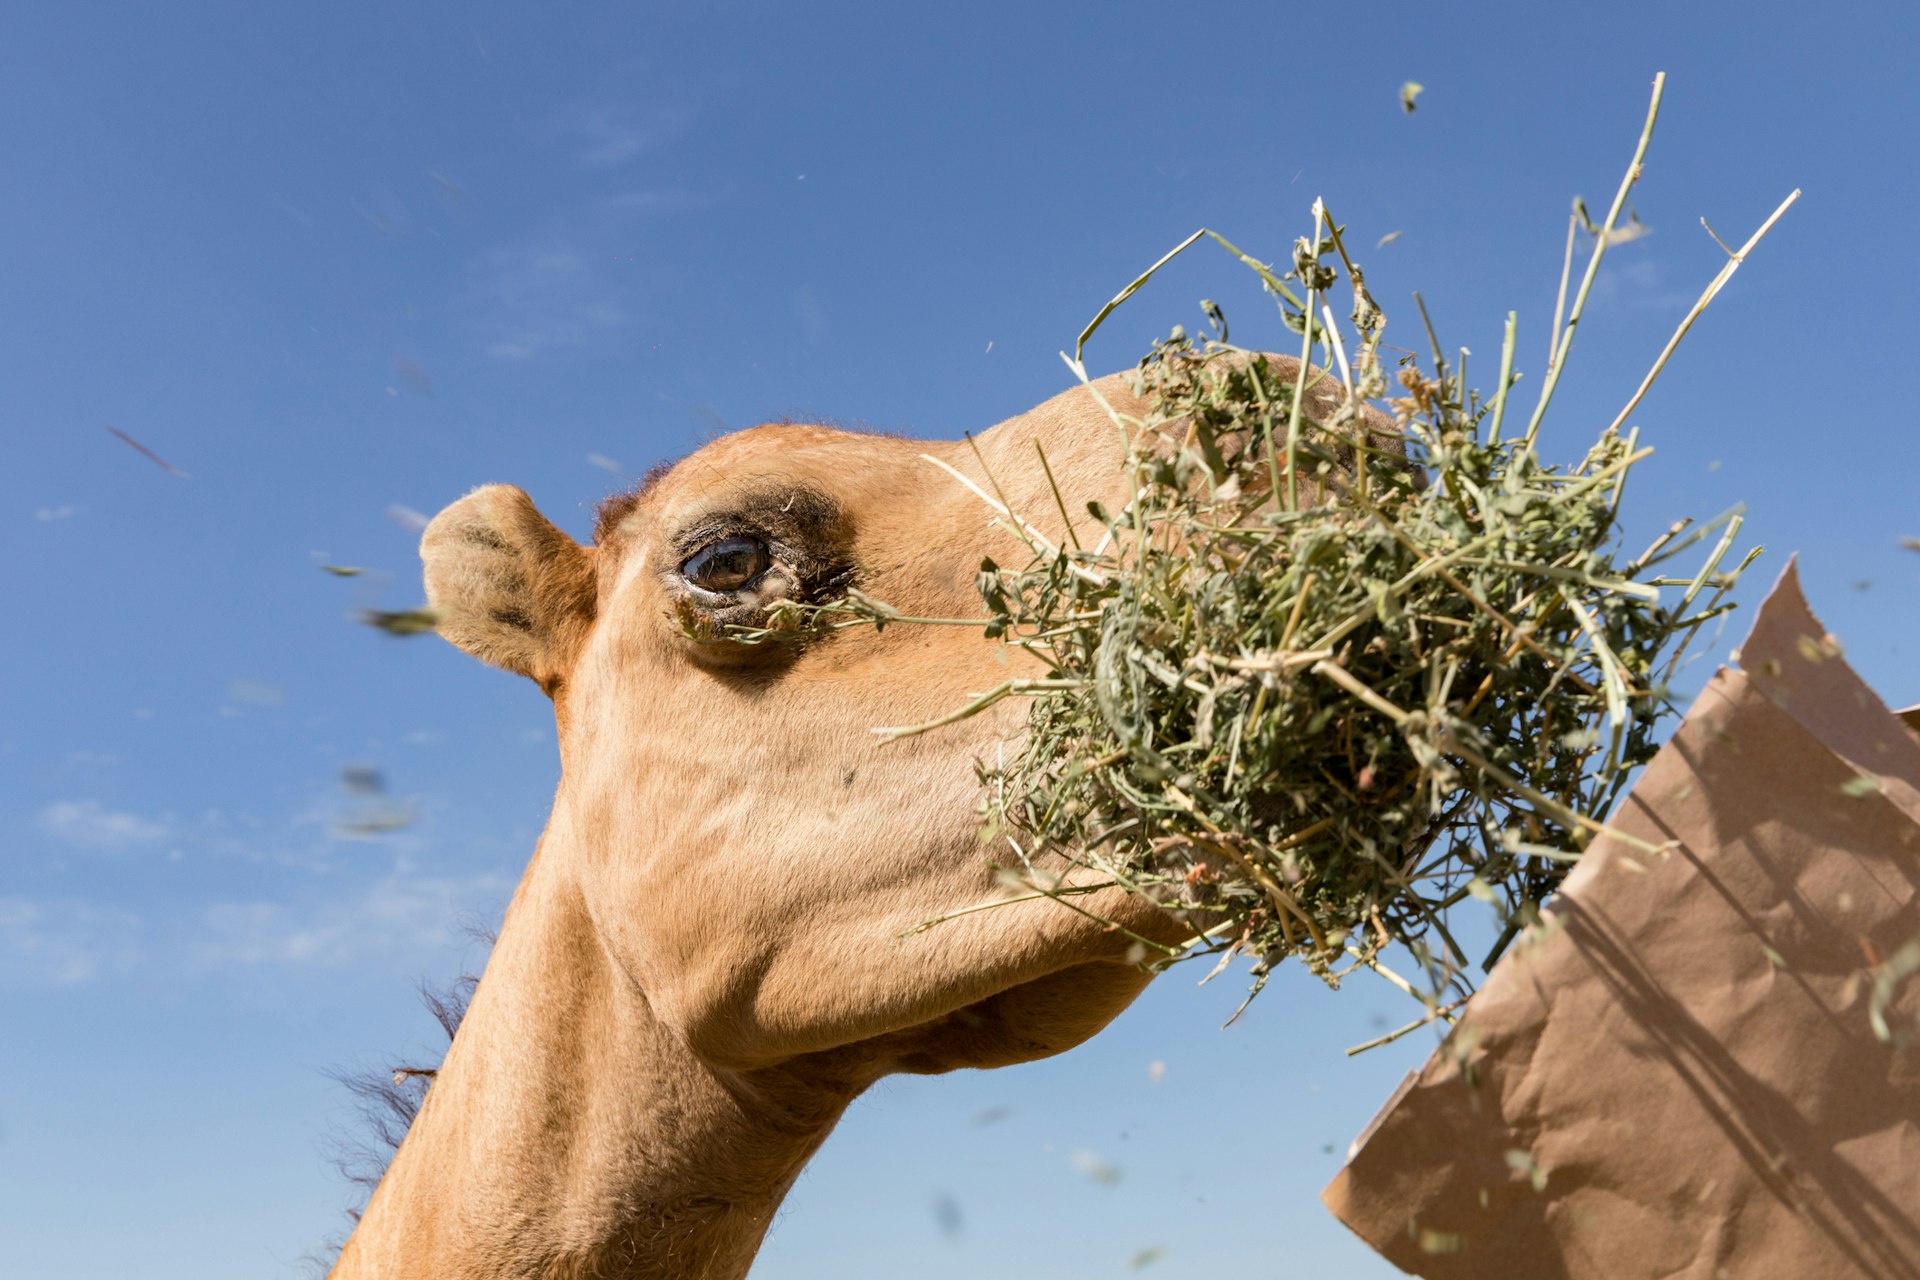 Close-up upwards shot of a a camel eating some grass with blue sky above